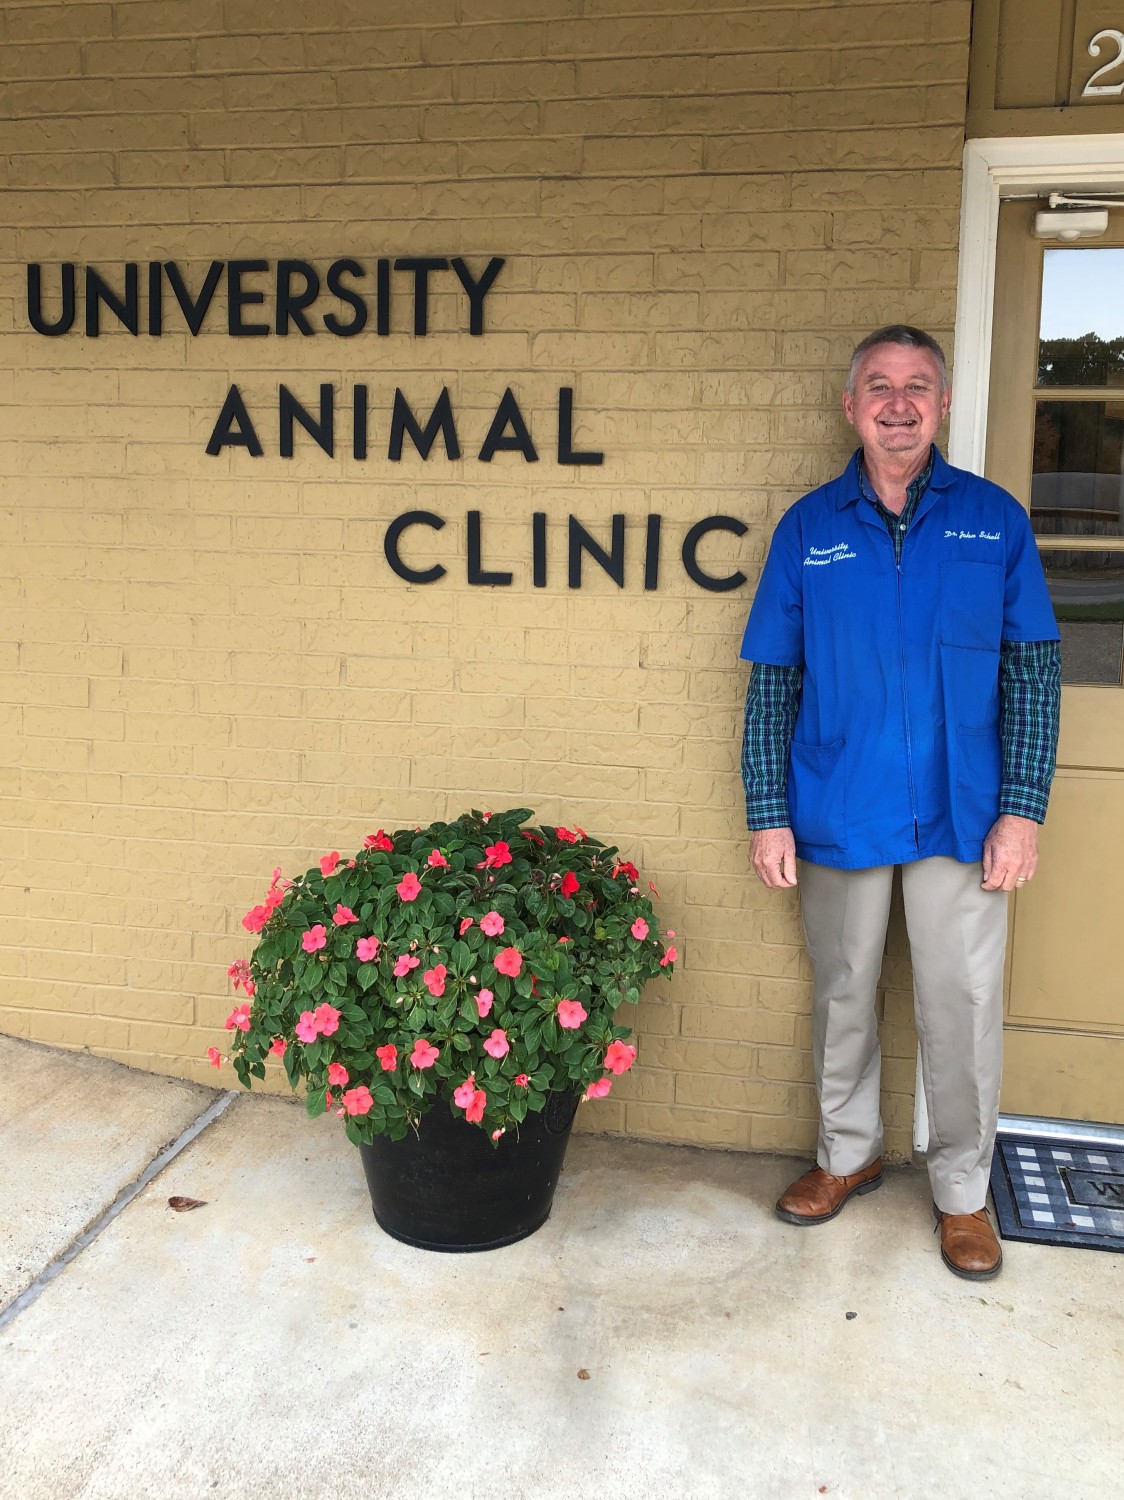 University Animal Clinic, Tyler, TX - Our Doctor and Staff